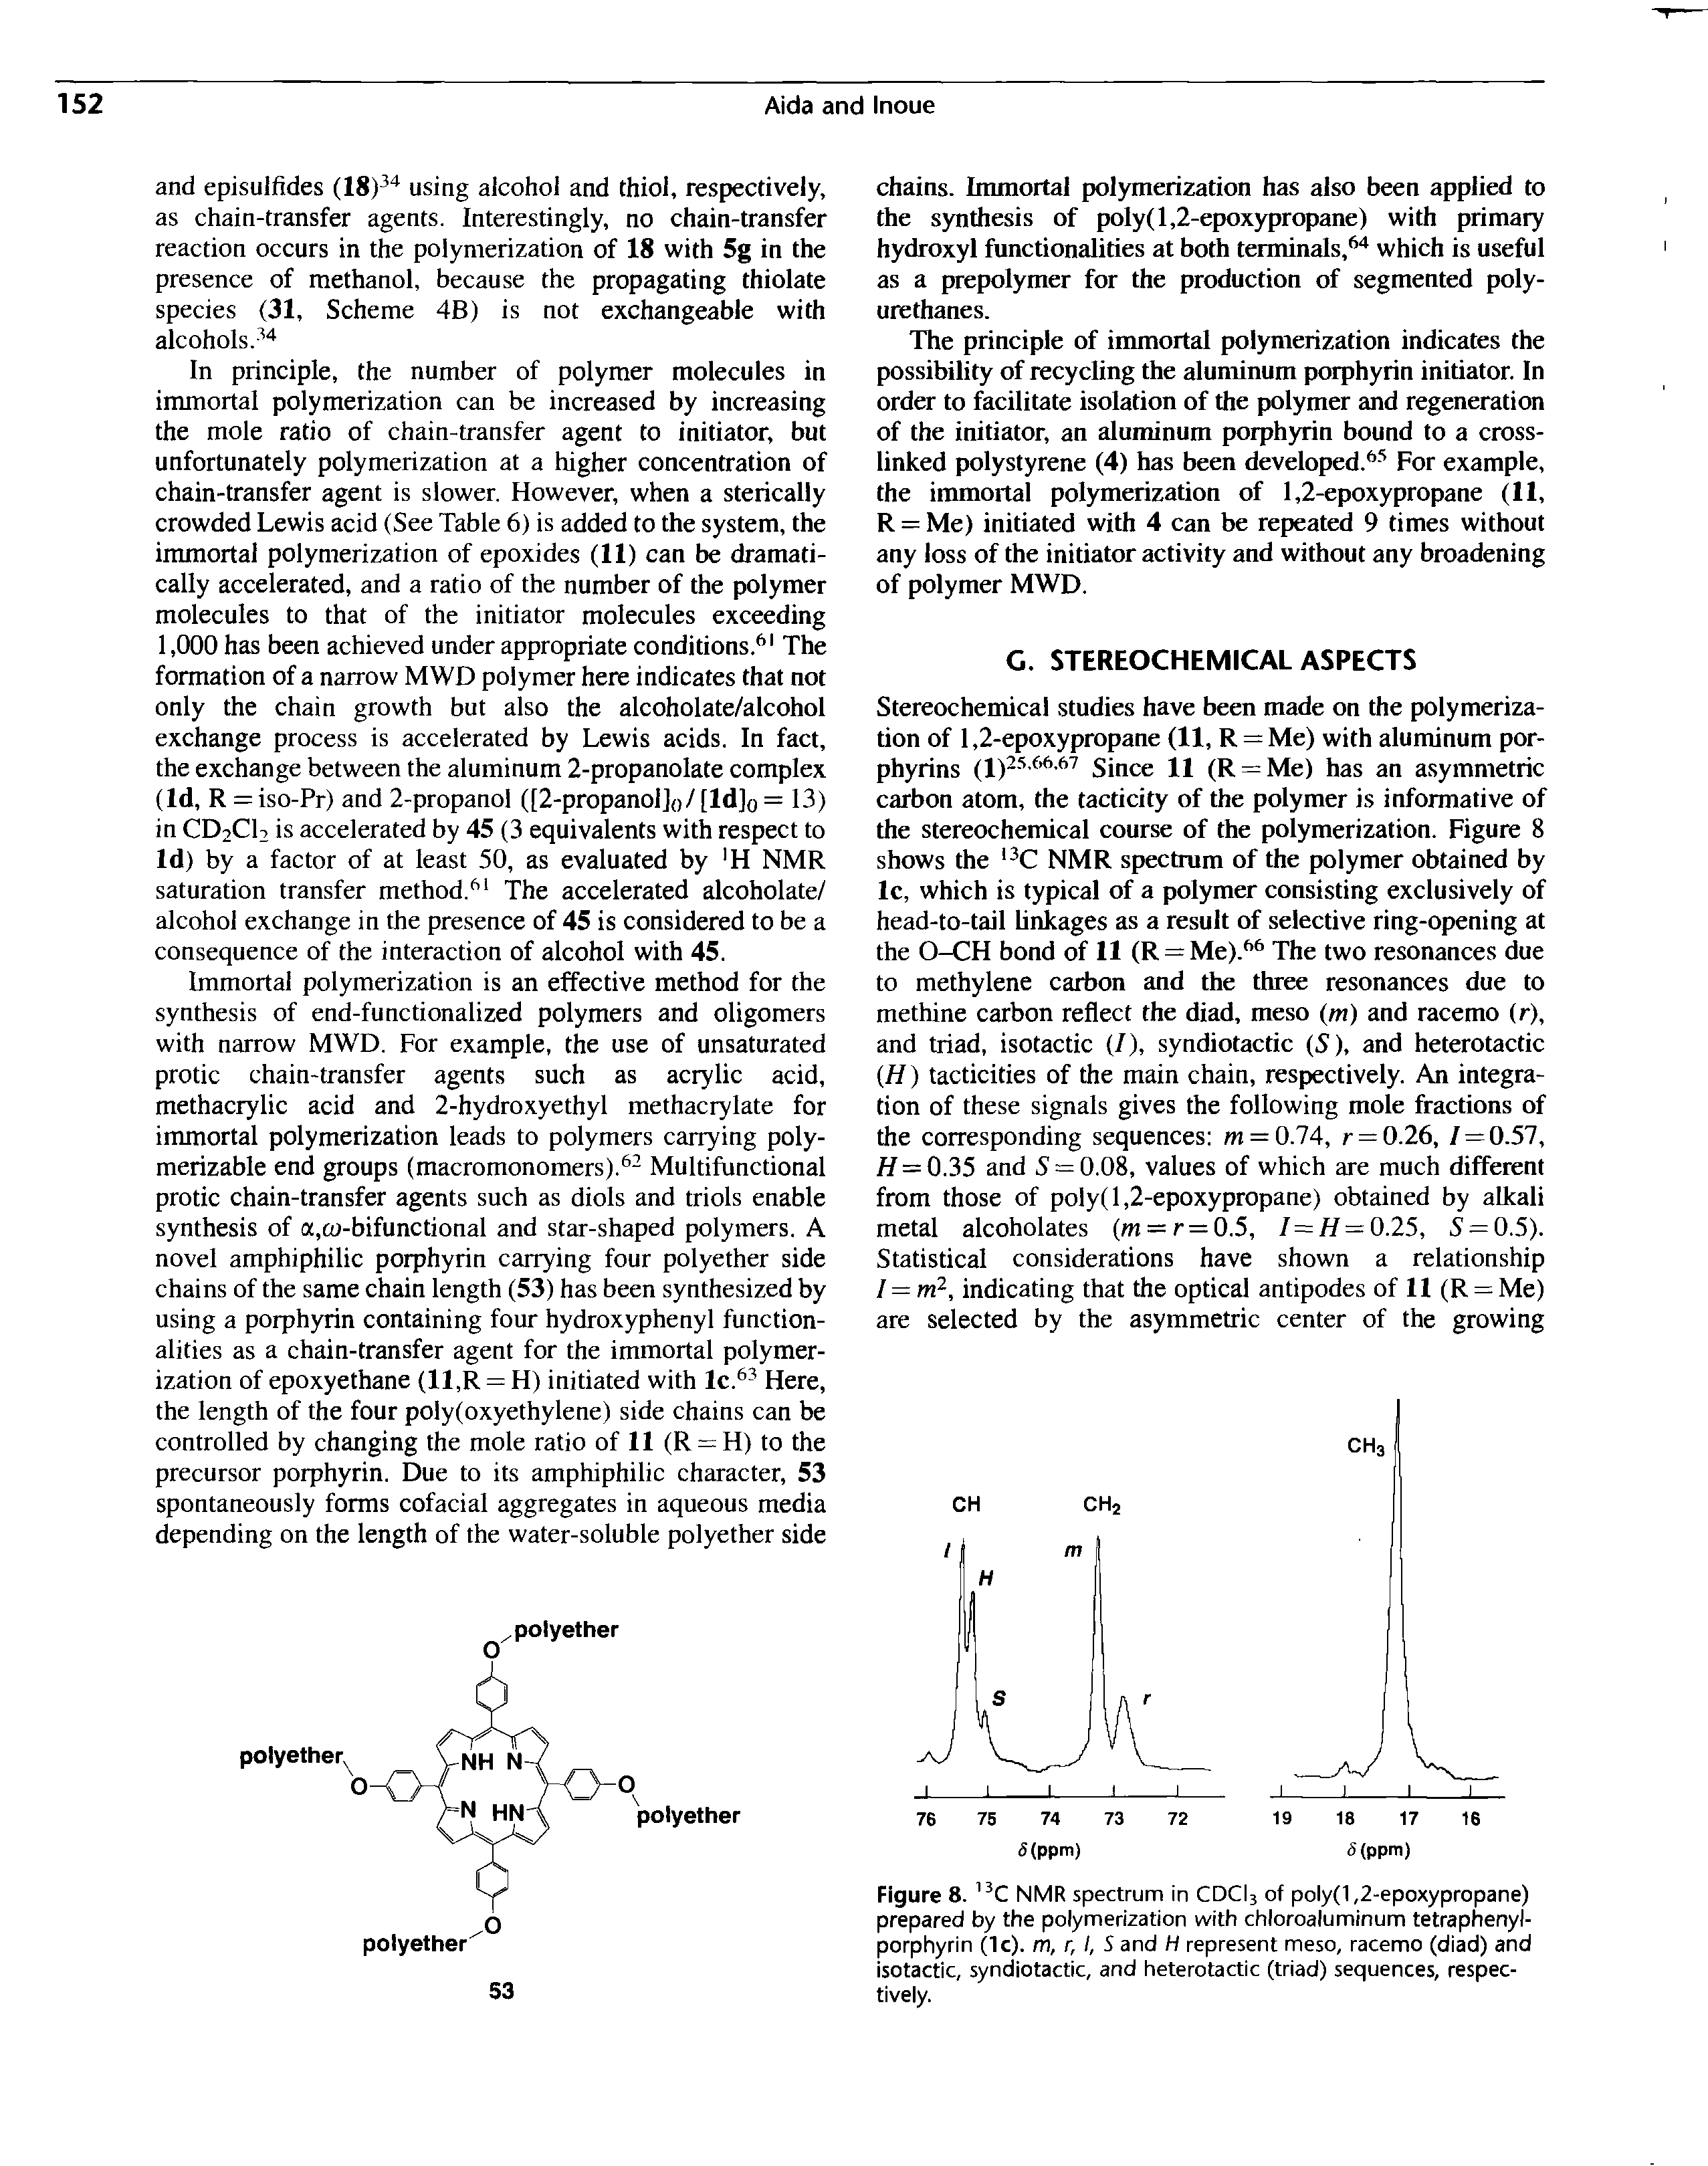 Figure 8. NMR spectrum in CDCI3 of poly(1,2-epoxypropane) prepared by the polymerization with chloroaluminum tetraphenyl-porphyrin (1c). m, r, I, S and H represent meso, racemo (diad) and isotactic, syndiotactic, and heterotactic (triad) sequences, respectively.